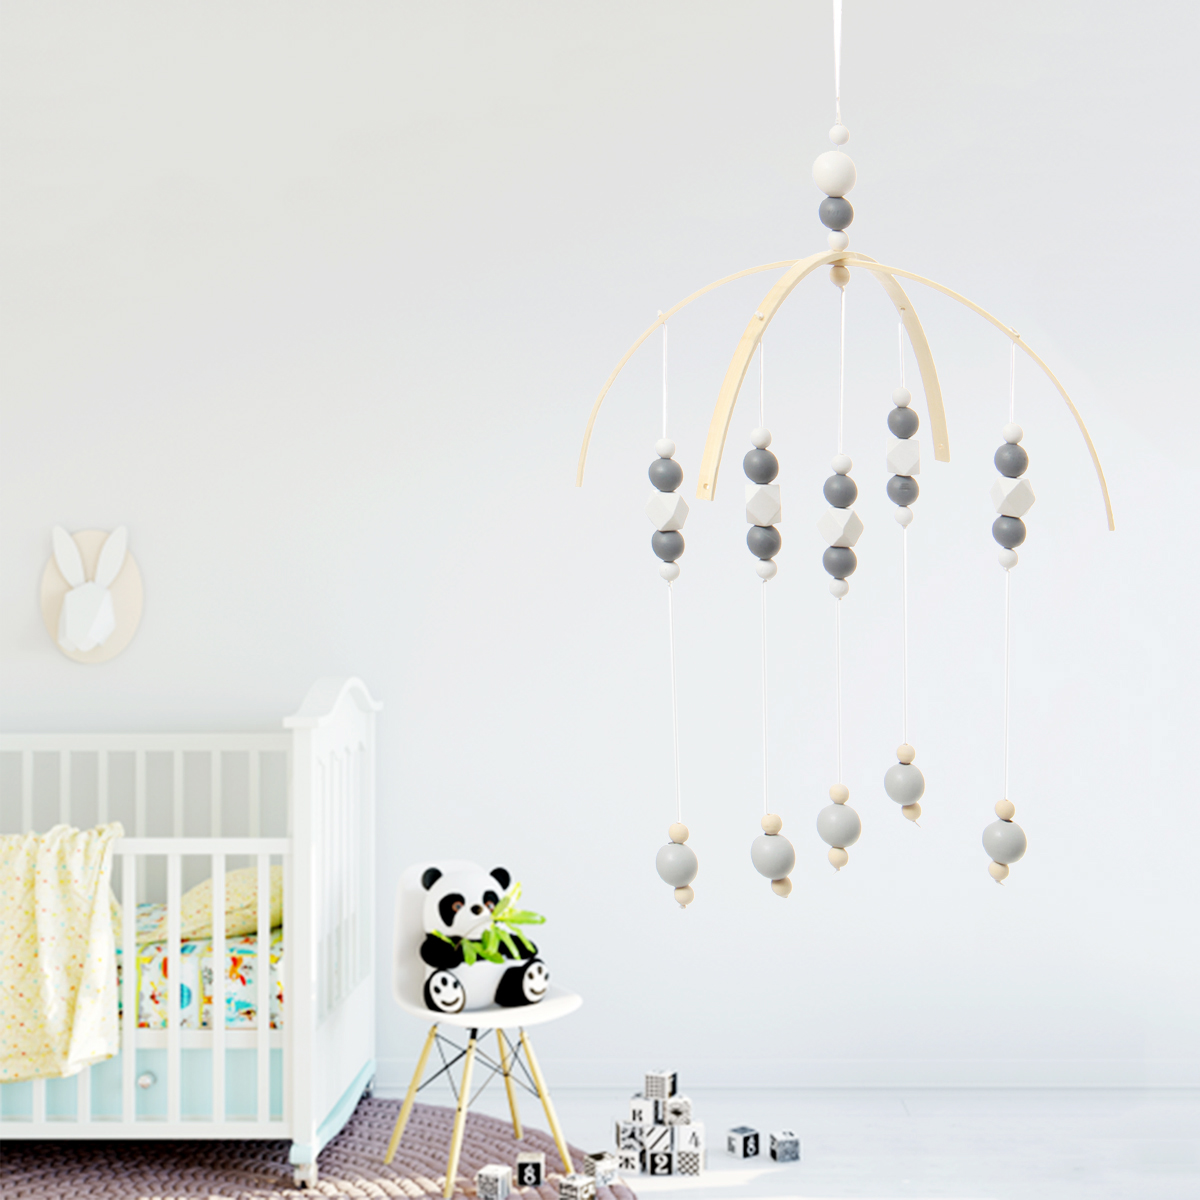 Wooden-Beads-Wind-Chimes-with-Wool-Balls-Baby-Bed-Hanging-Windbell-Crib-Tent-Kids-Room-Decorations-O-1906546-8